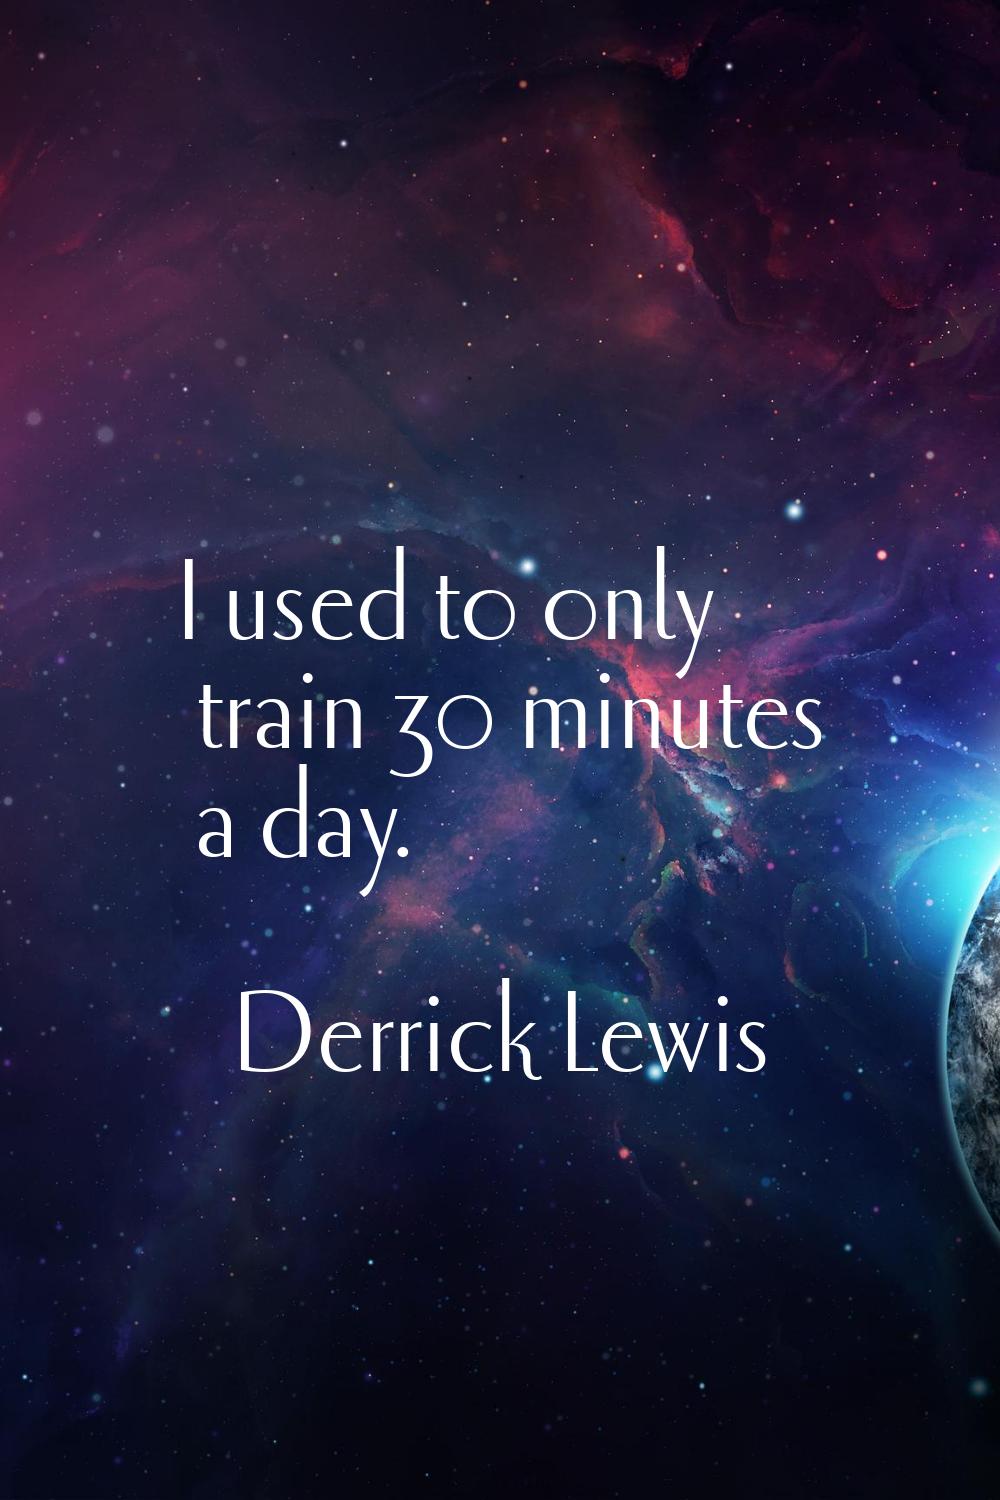 I used to only train 30 minutes a day.